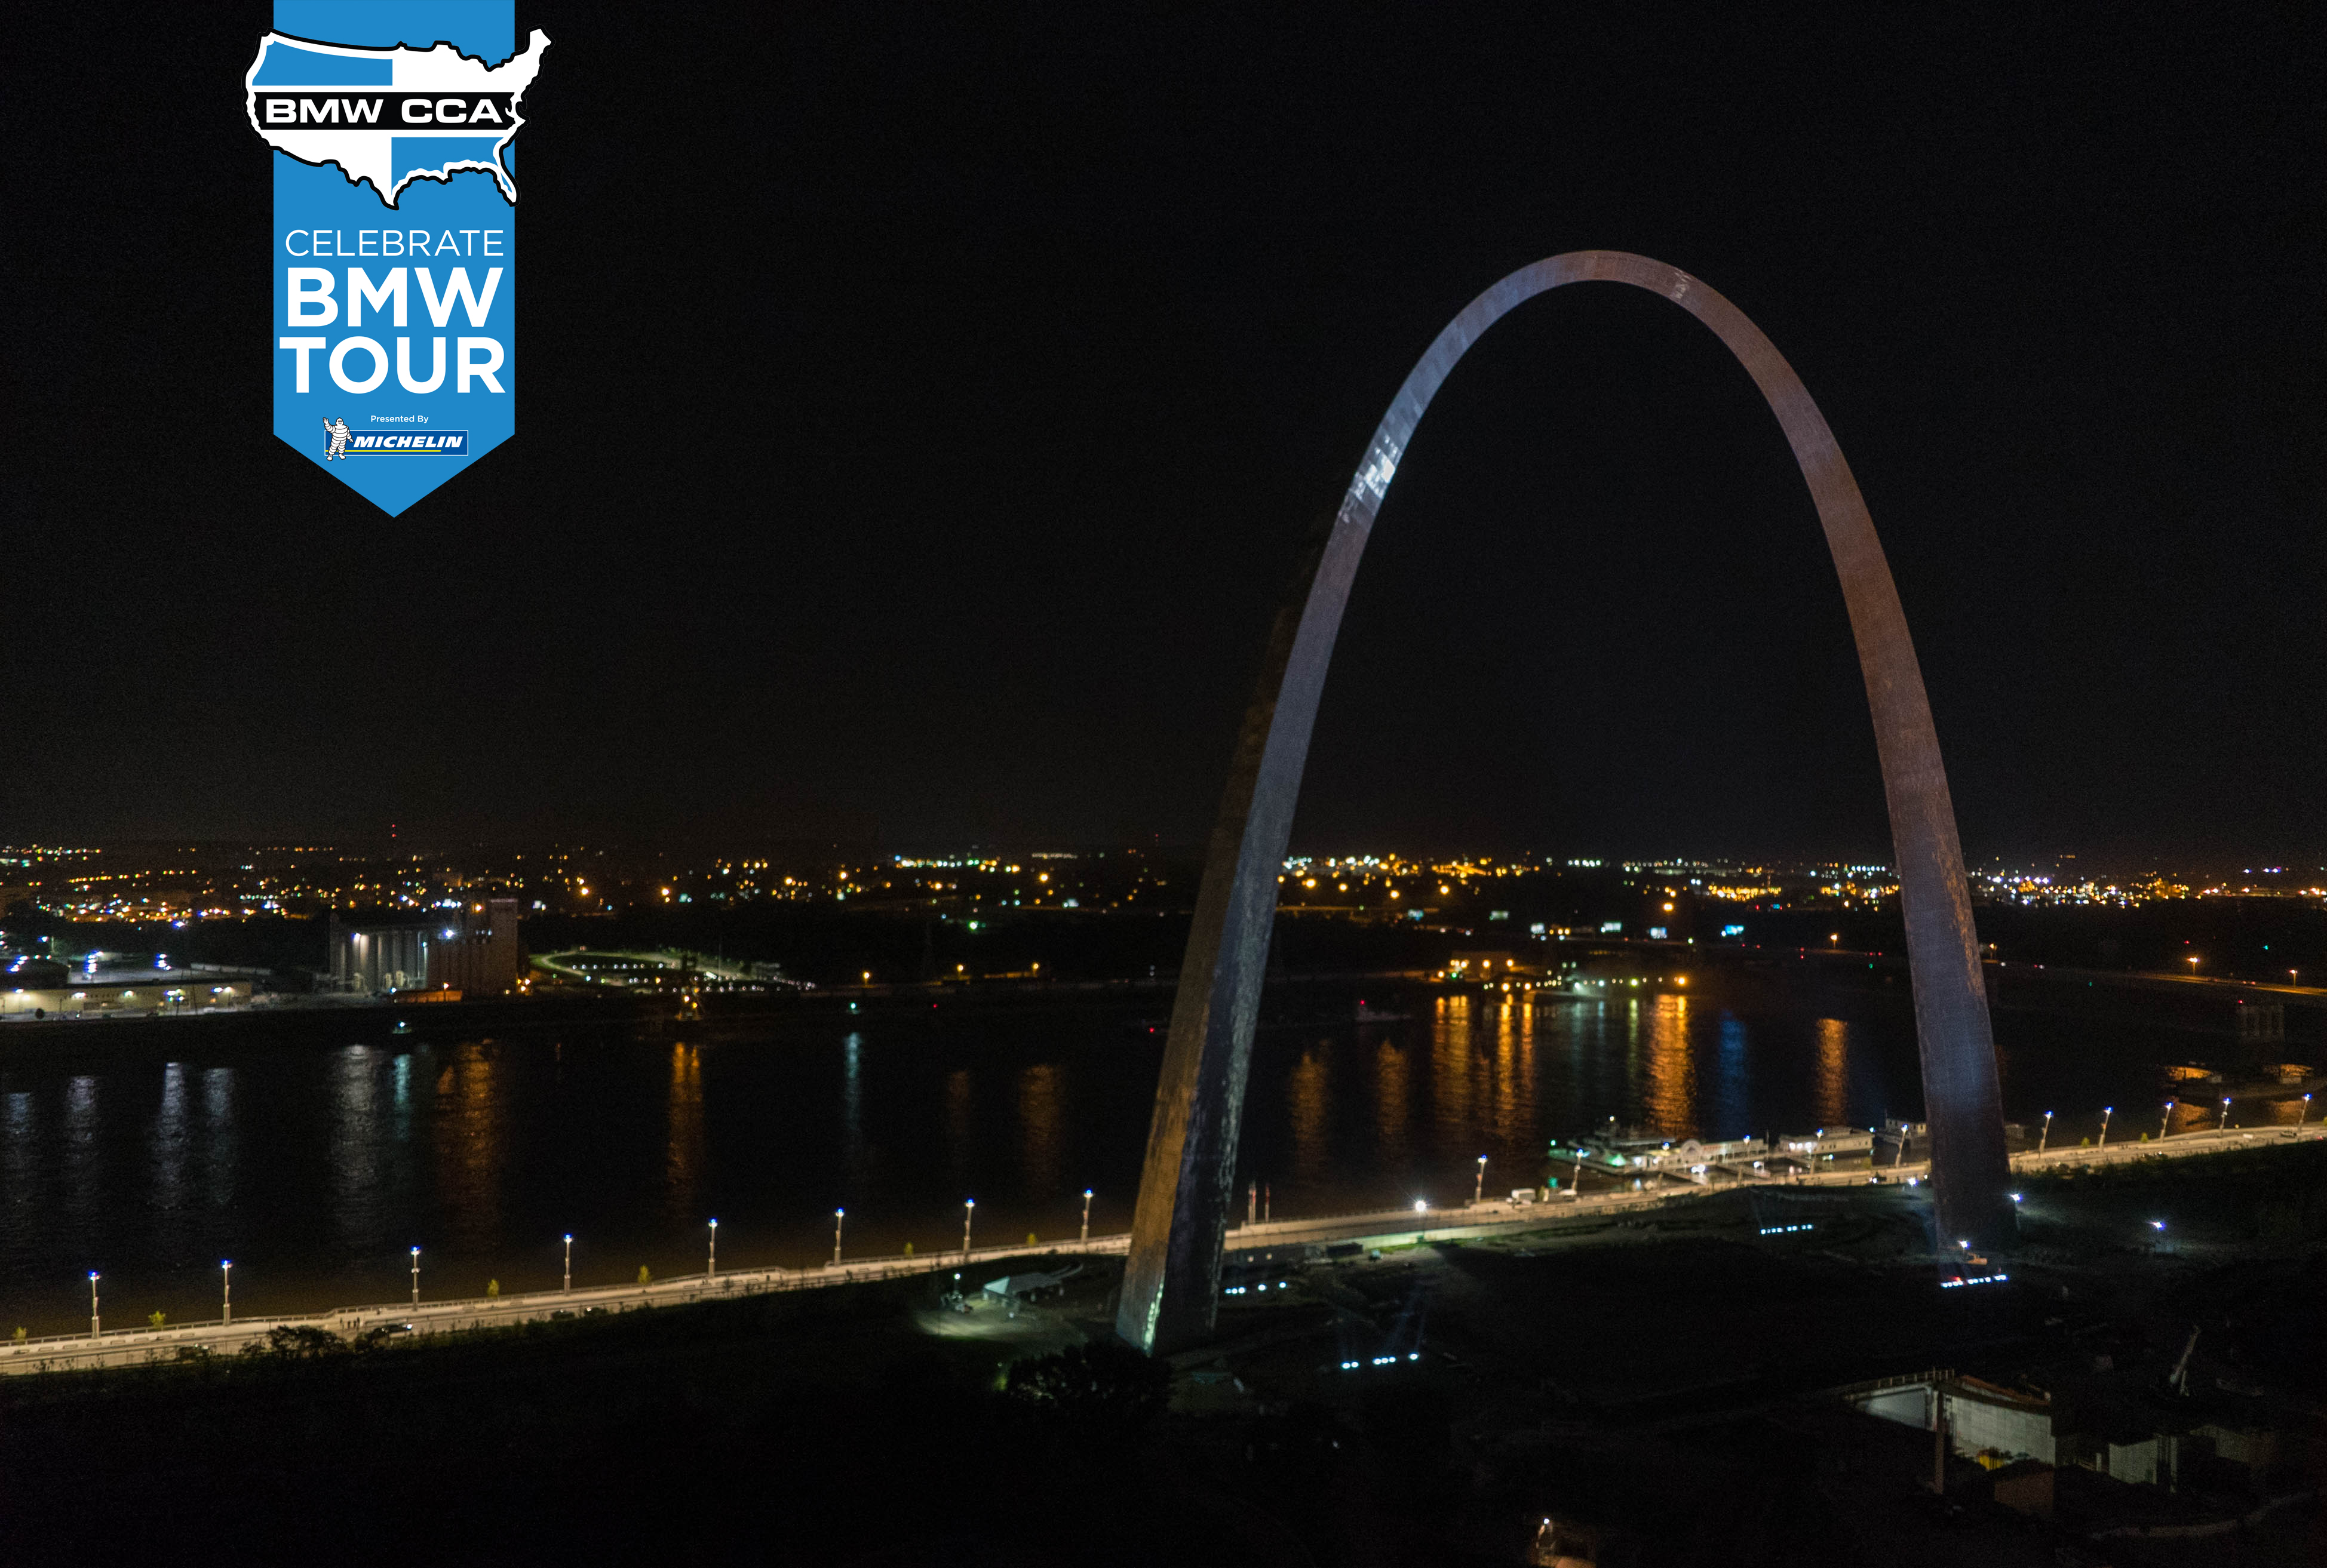 St. Louis: BMW CCA Celebrate BMW Tour Presented by Michelin - BimmerLife